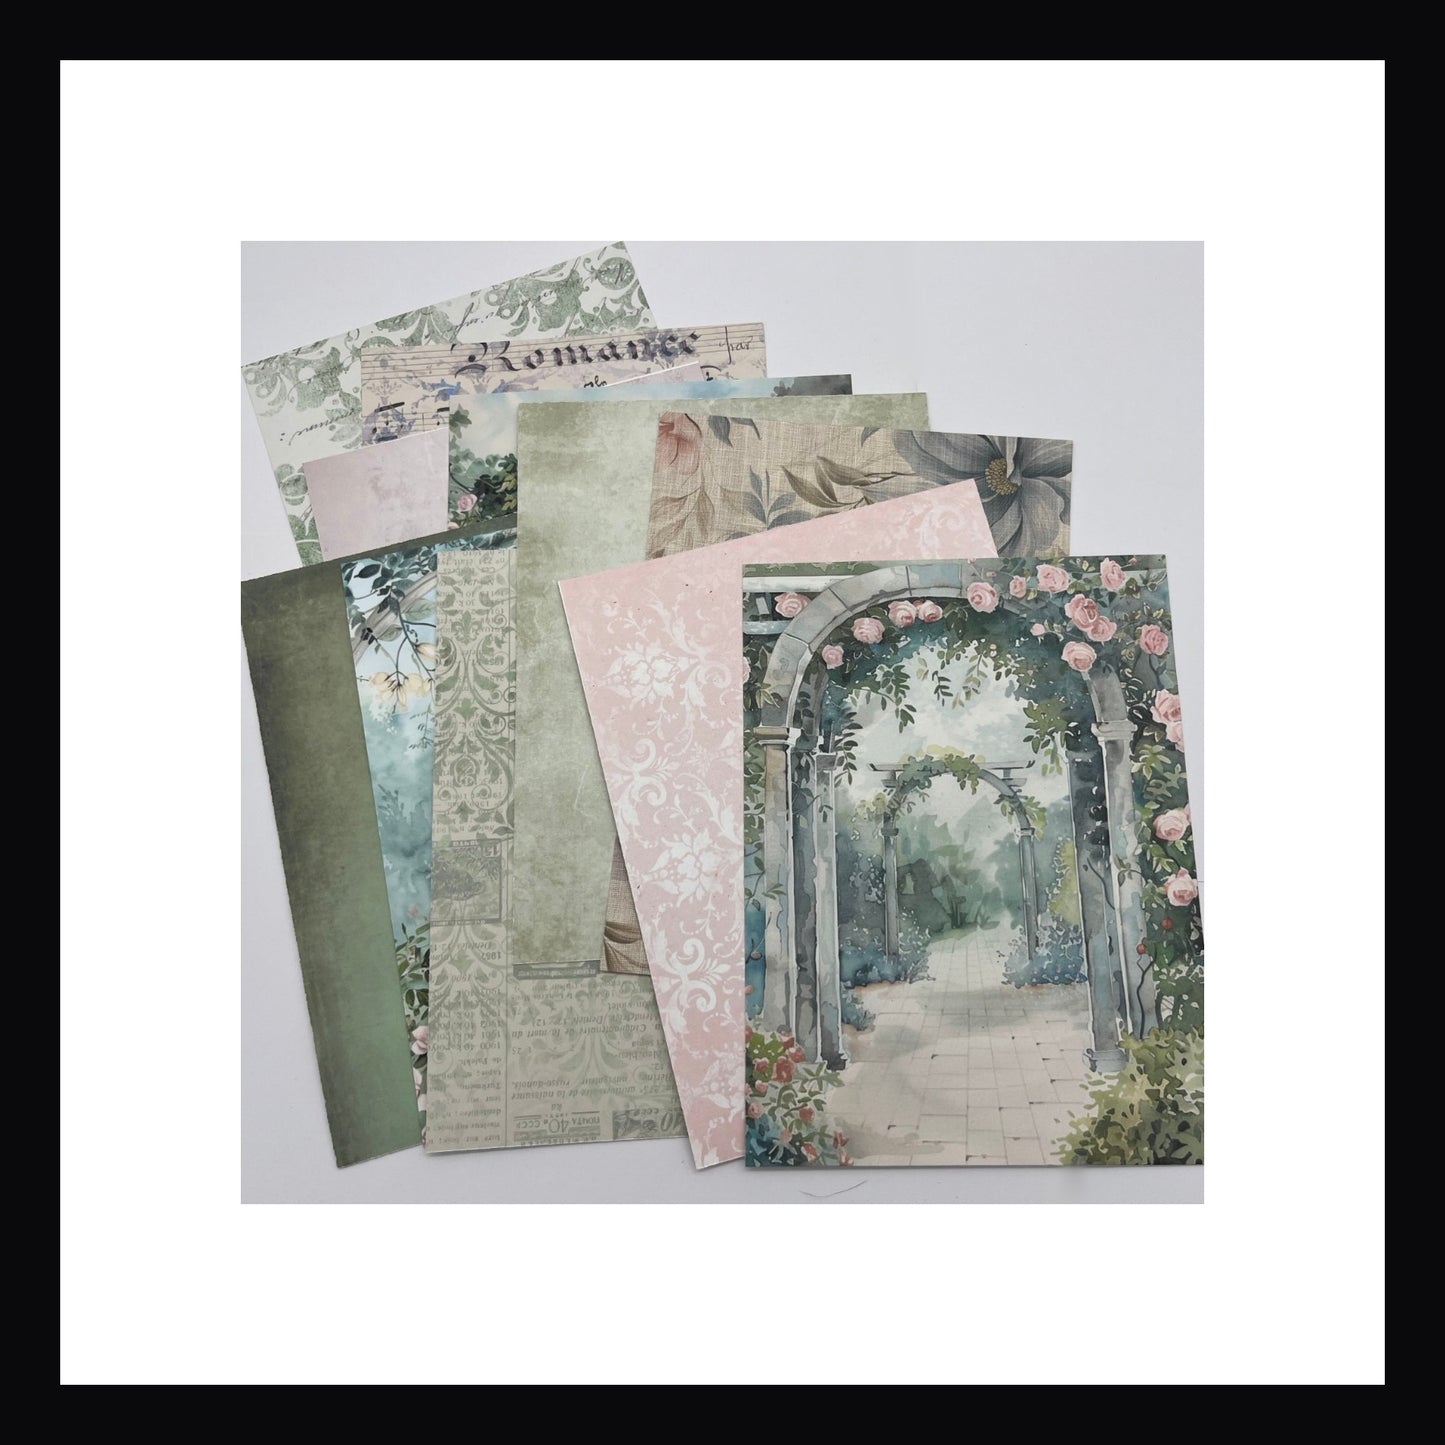 Gardening Junk Journaling Kit contains 12 double sided papers each measuring 6x8". Designs include peaceful garden scenes, damask prints, vintage music and floral linens.